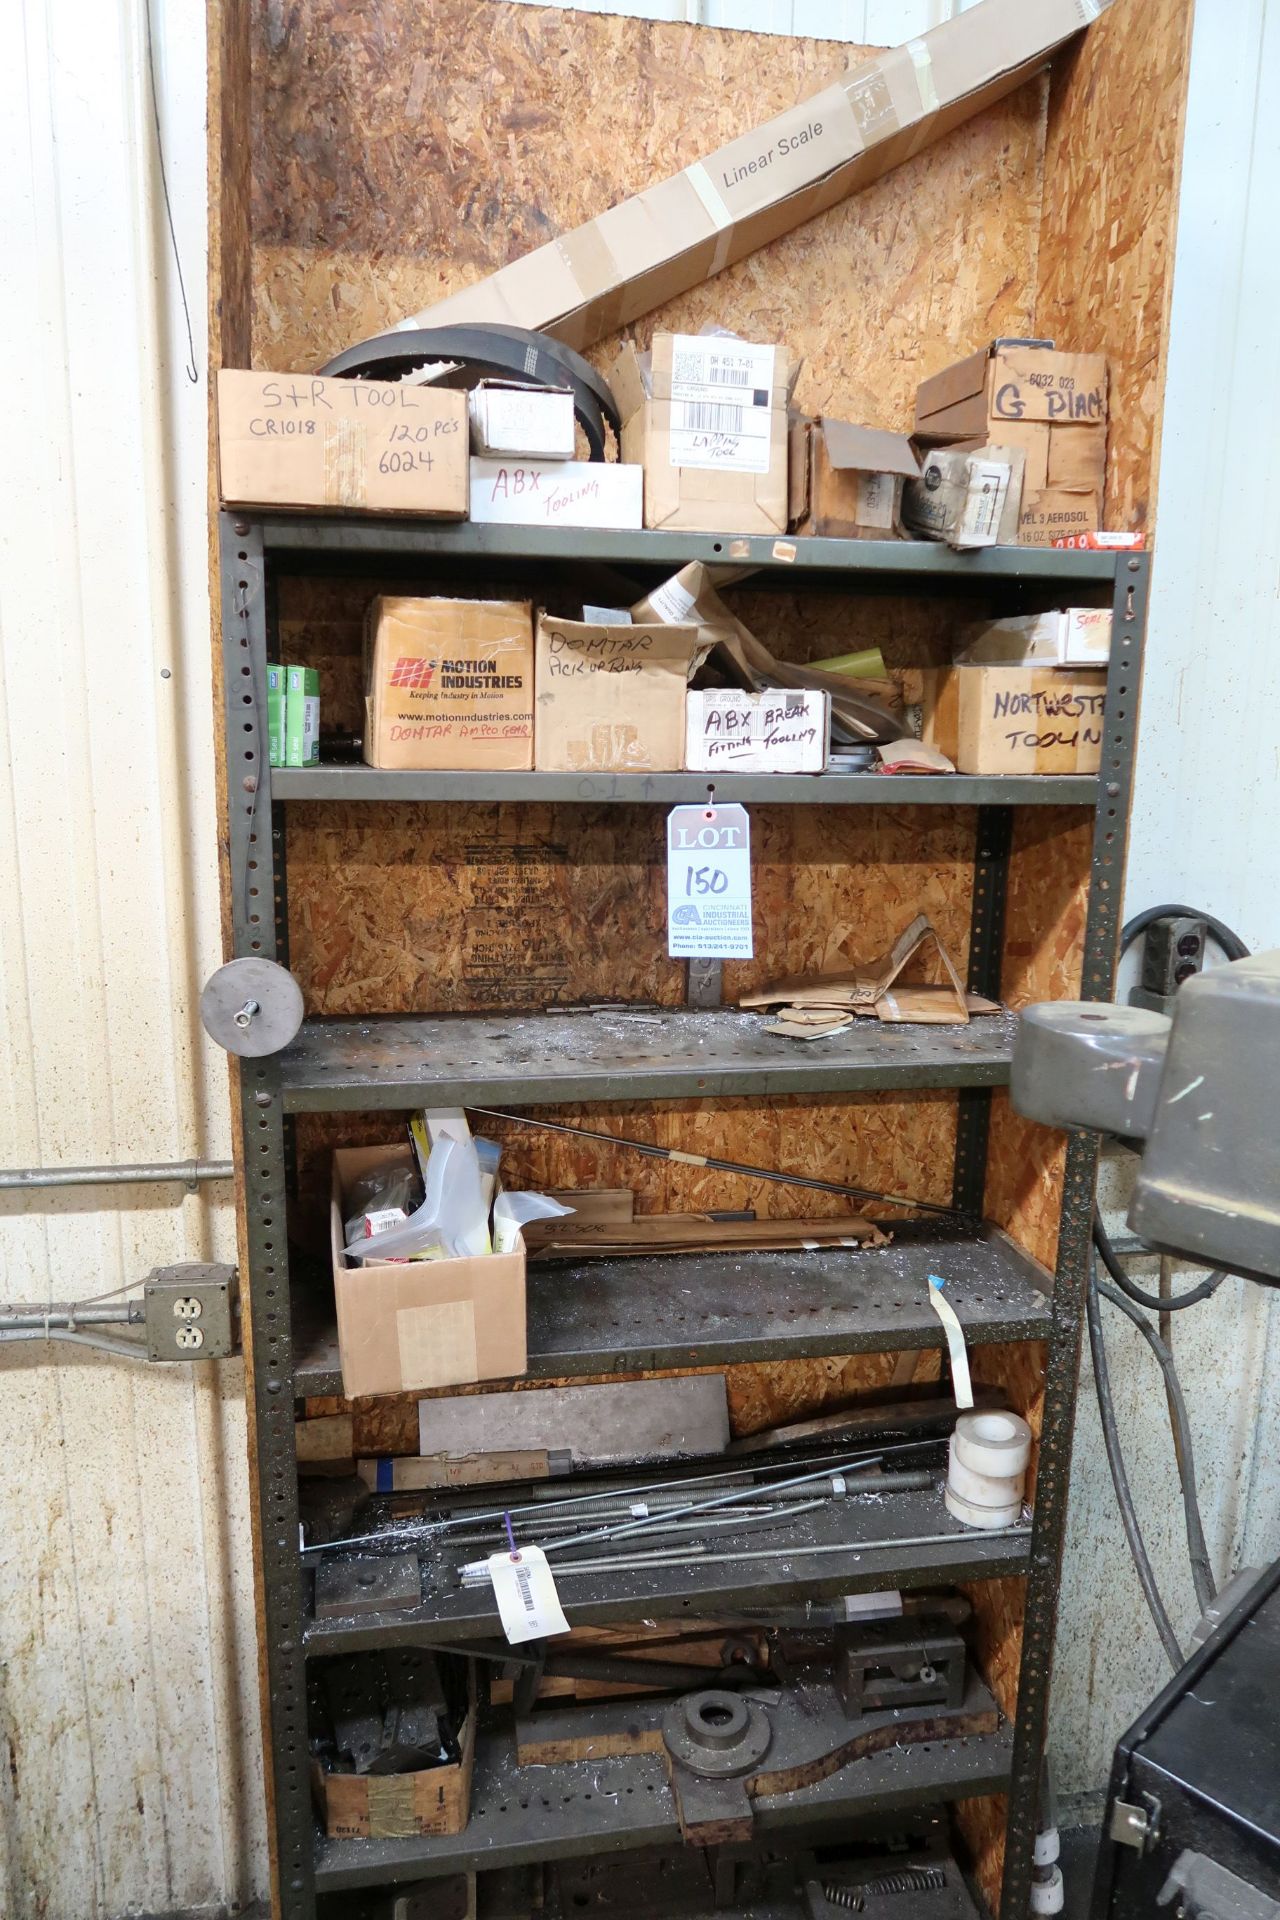 CONTENTS OF SHELVING - MISCELLANEOUS TOOLING WITH SHELVING UNIT